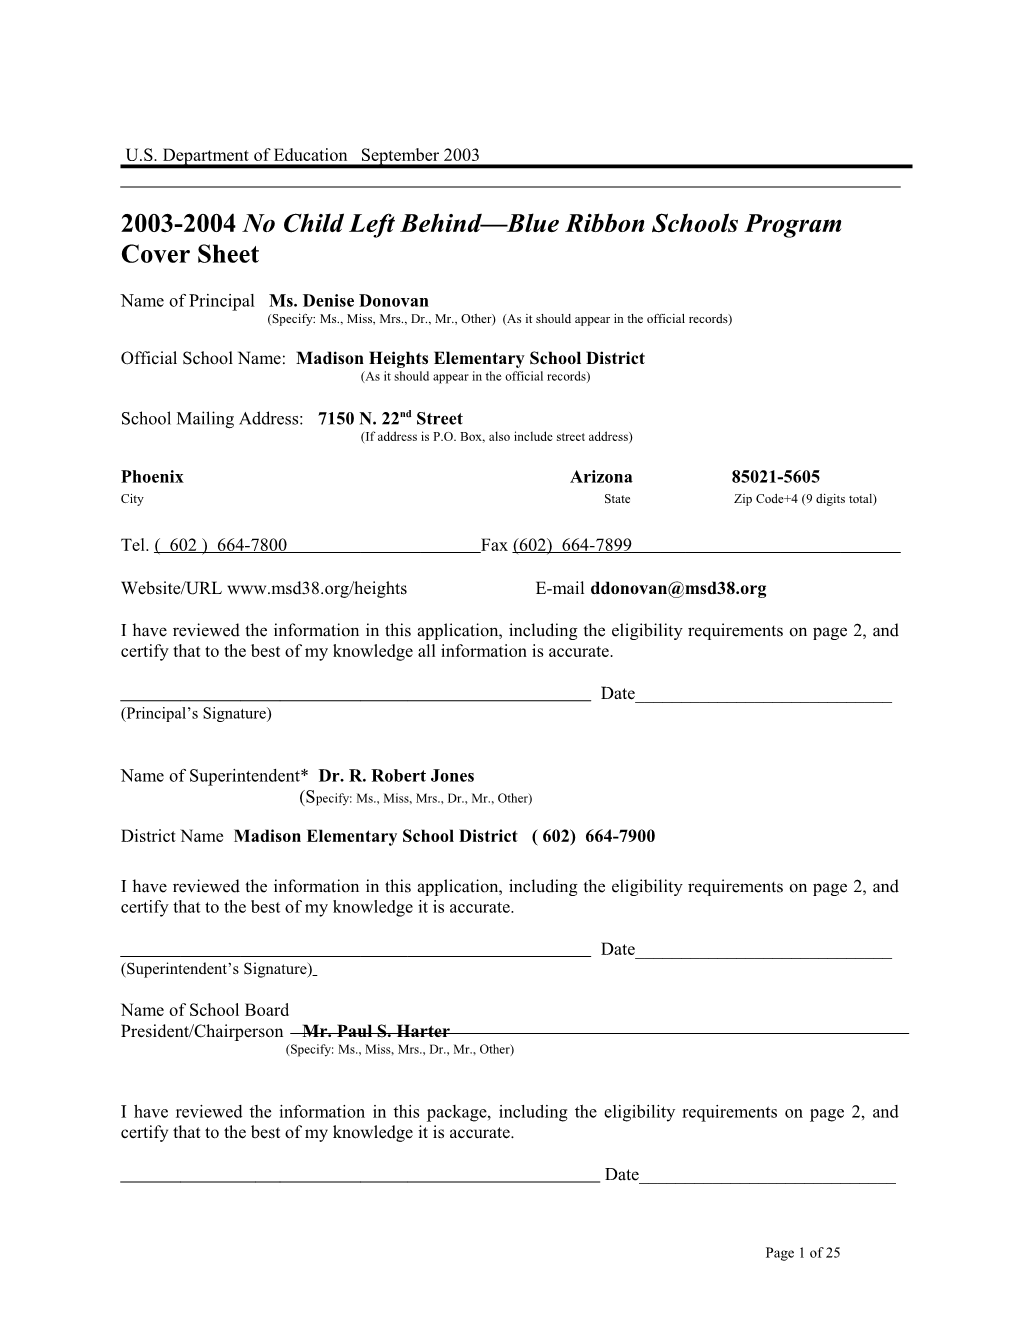 Madison Heights School 2004 No Child Left Behind-Blue Ribbon School Application (Msword)